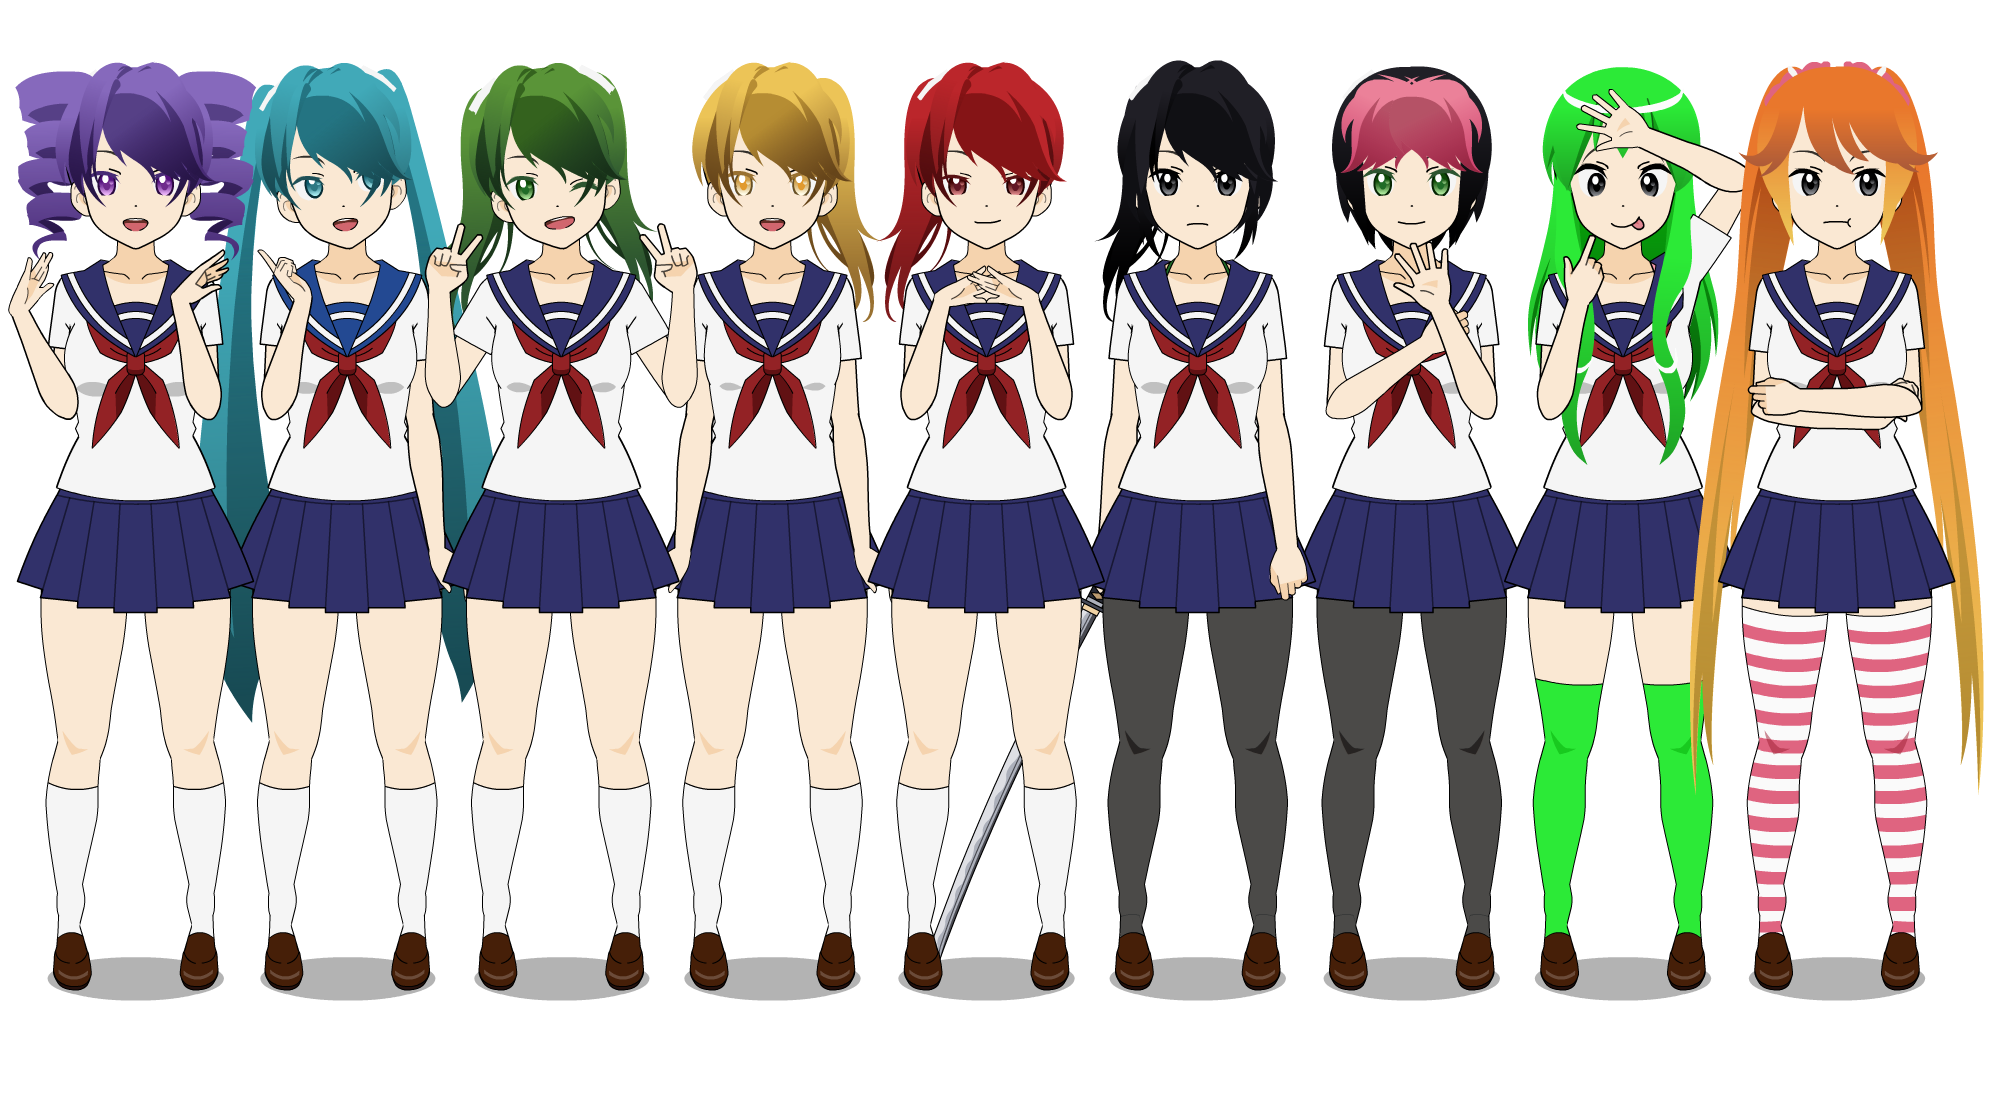 Yandere Simulator Character Pack 1 Exports By Chellbit On Deviantart